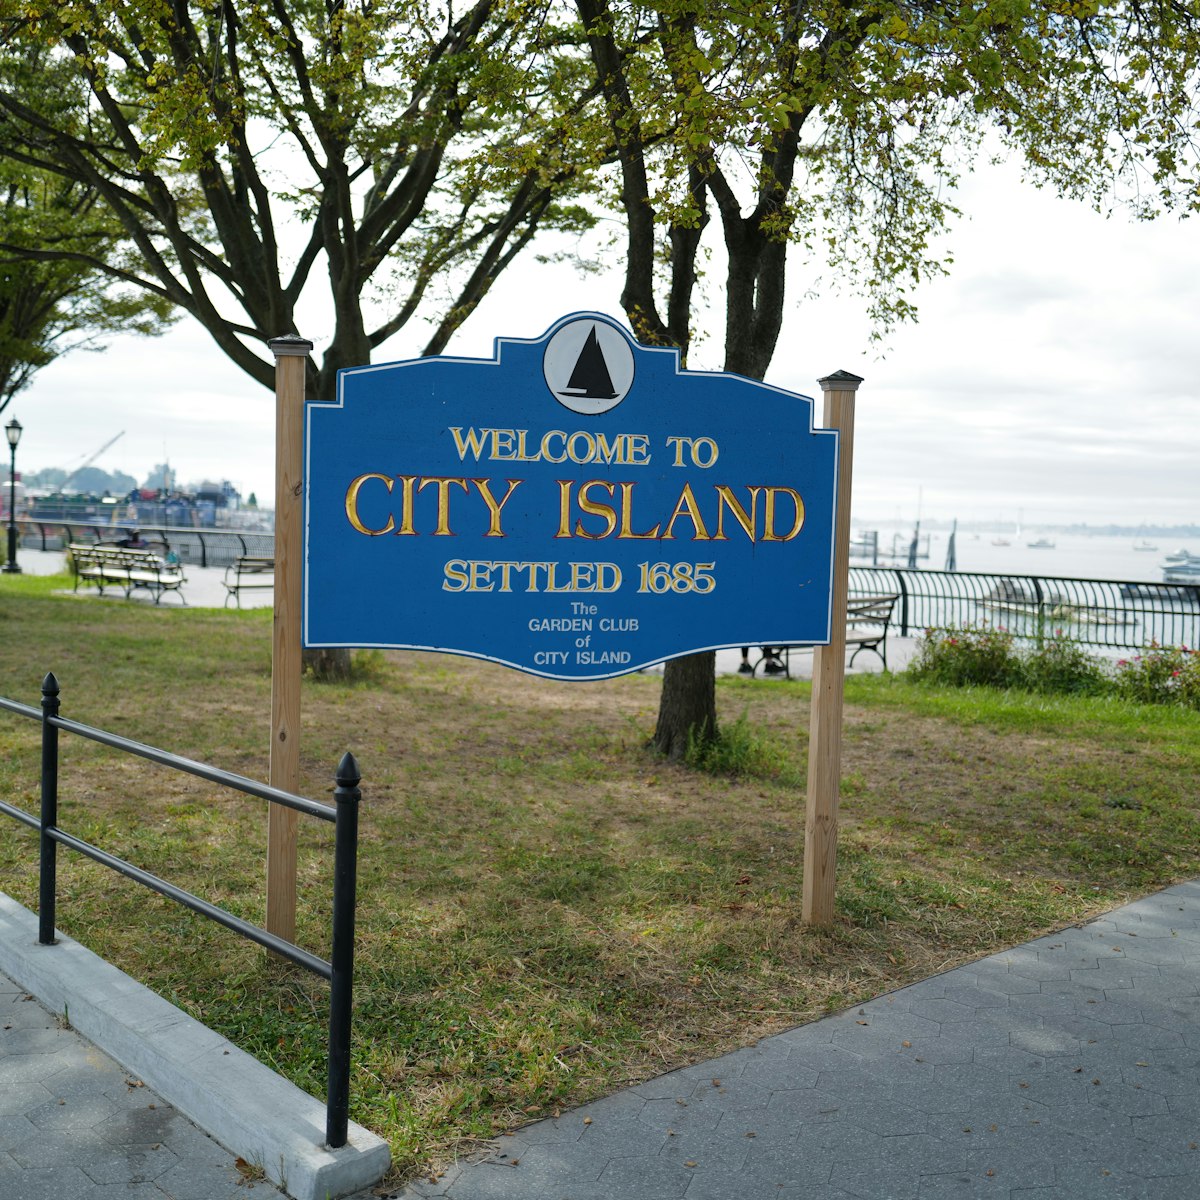 Welcome sign on City Island.